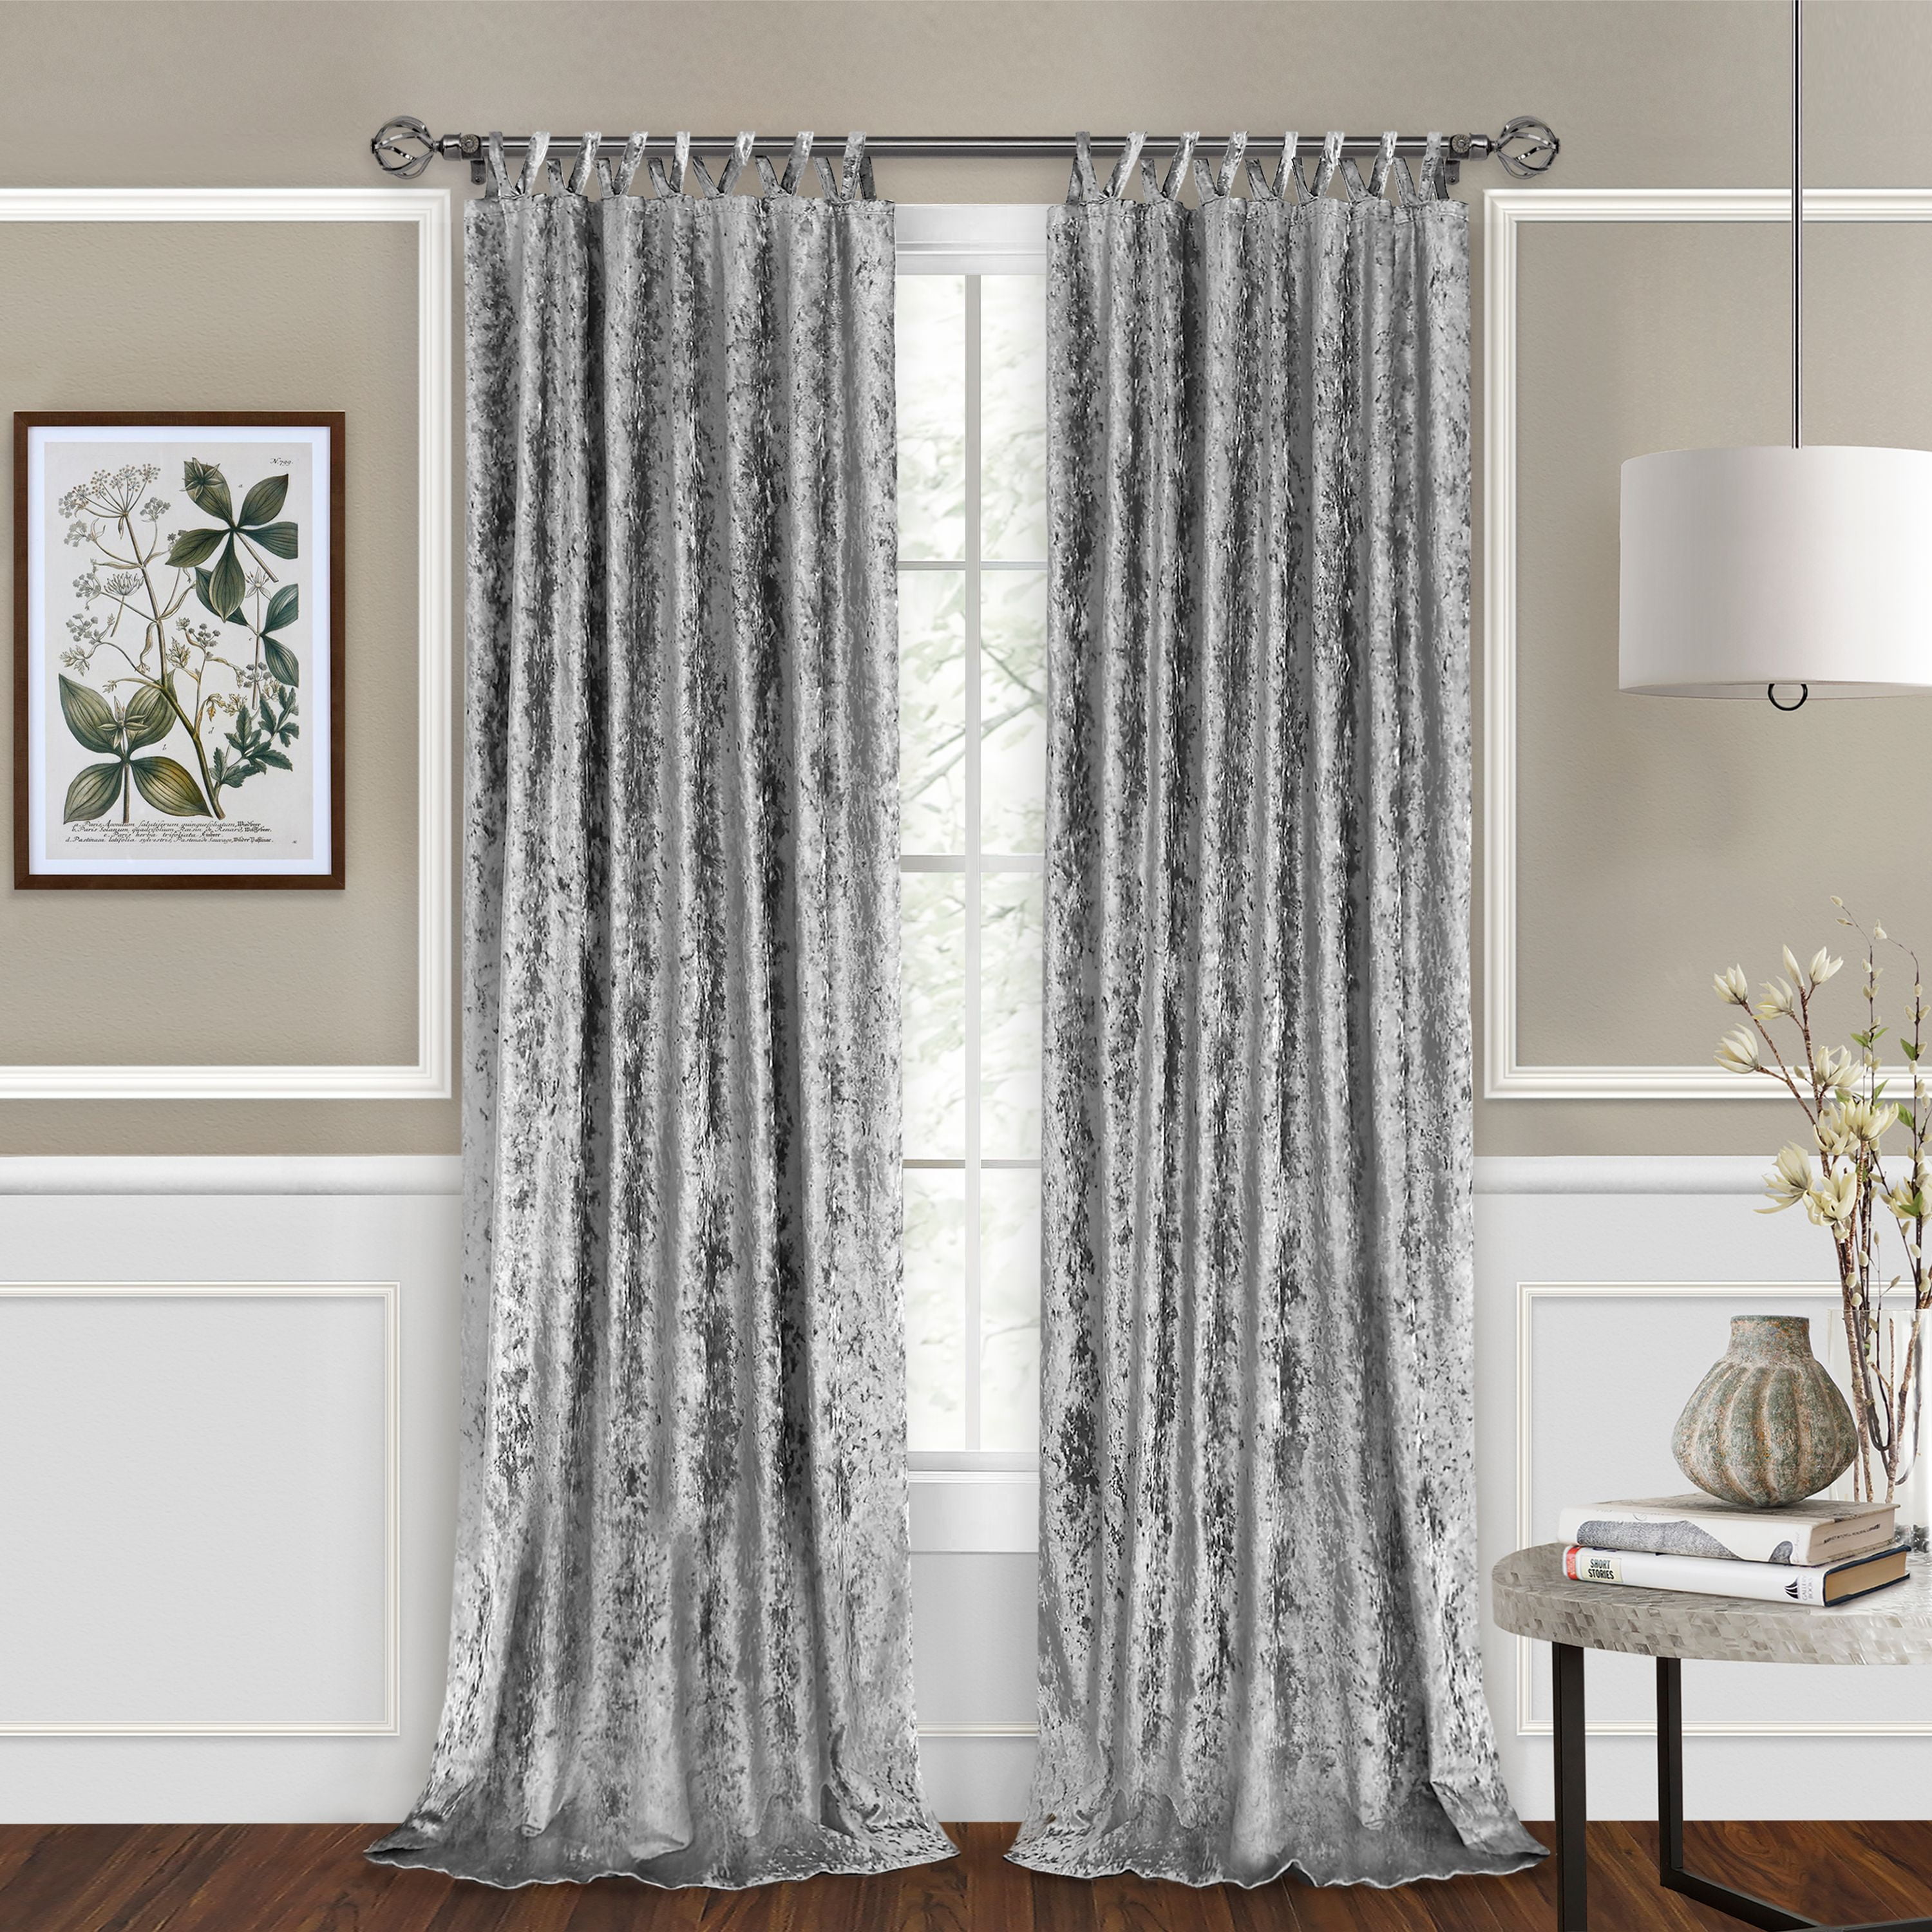 Bohogeo Grey and White Buffalo Plaid Kitchen Curtains,Tie-up and Straight  Decorative Window Drepes 56 x 18,Silver/Gray,1 Panel 